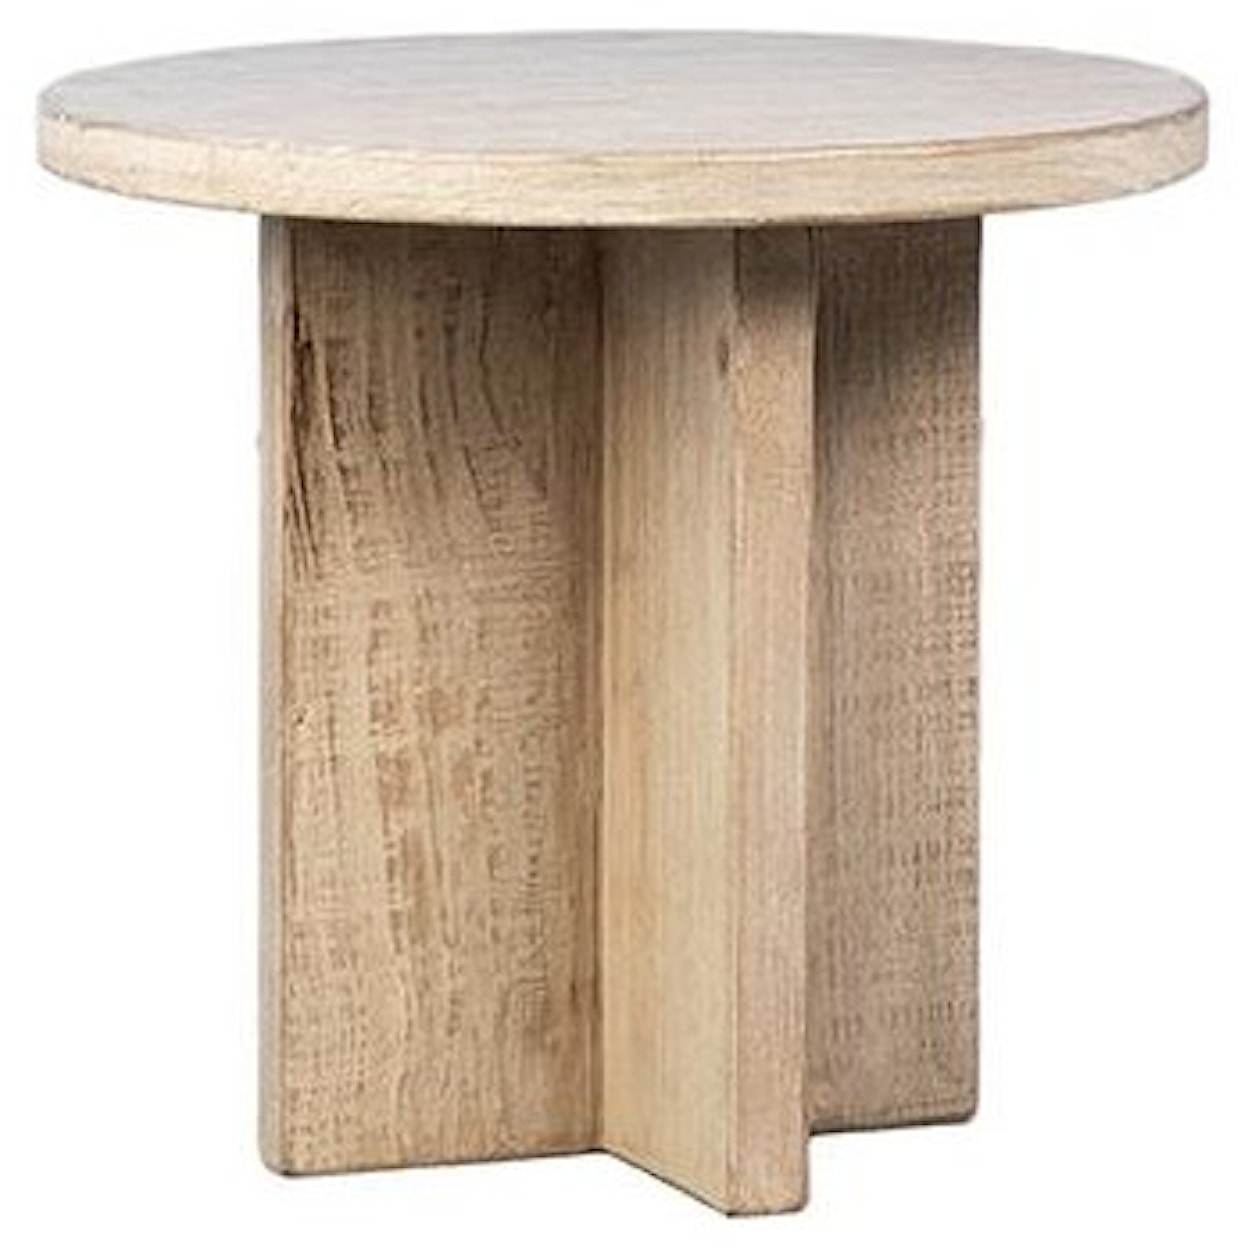 Dovetail Furniture End Tables and Night Stands Haley End Table